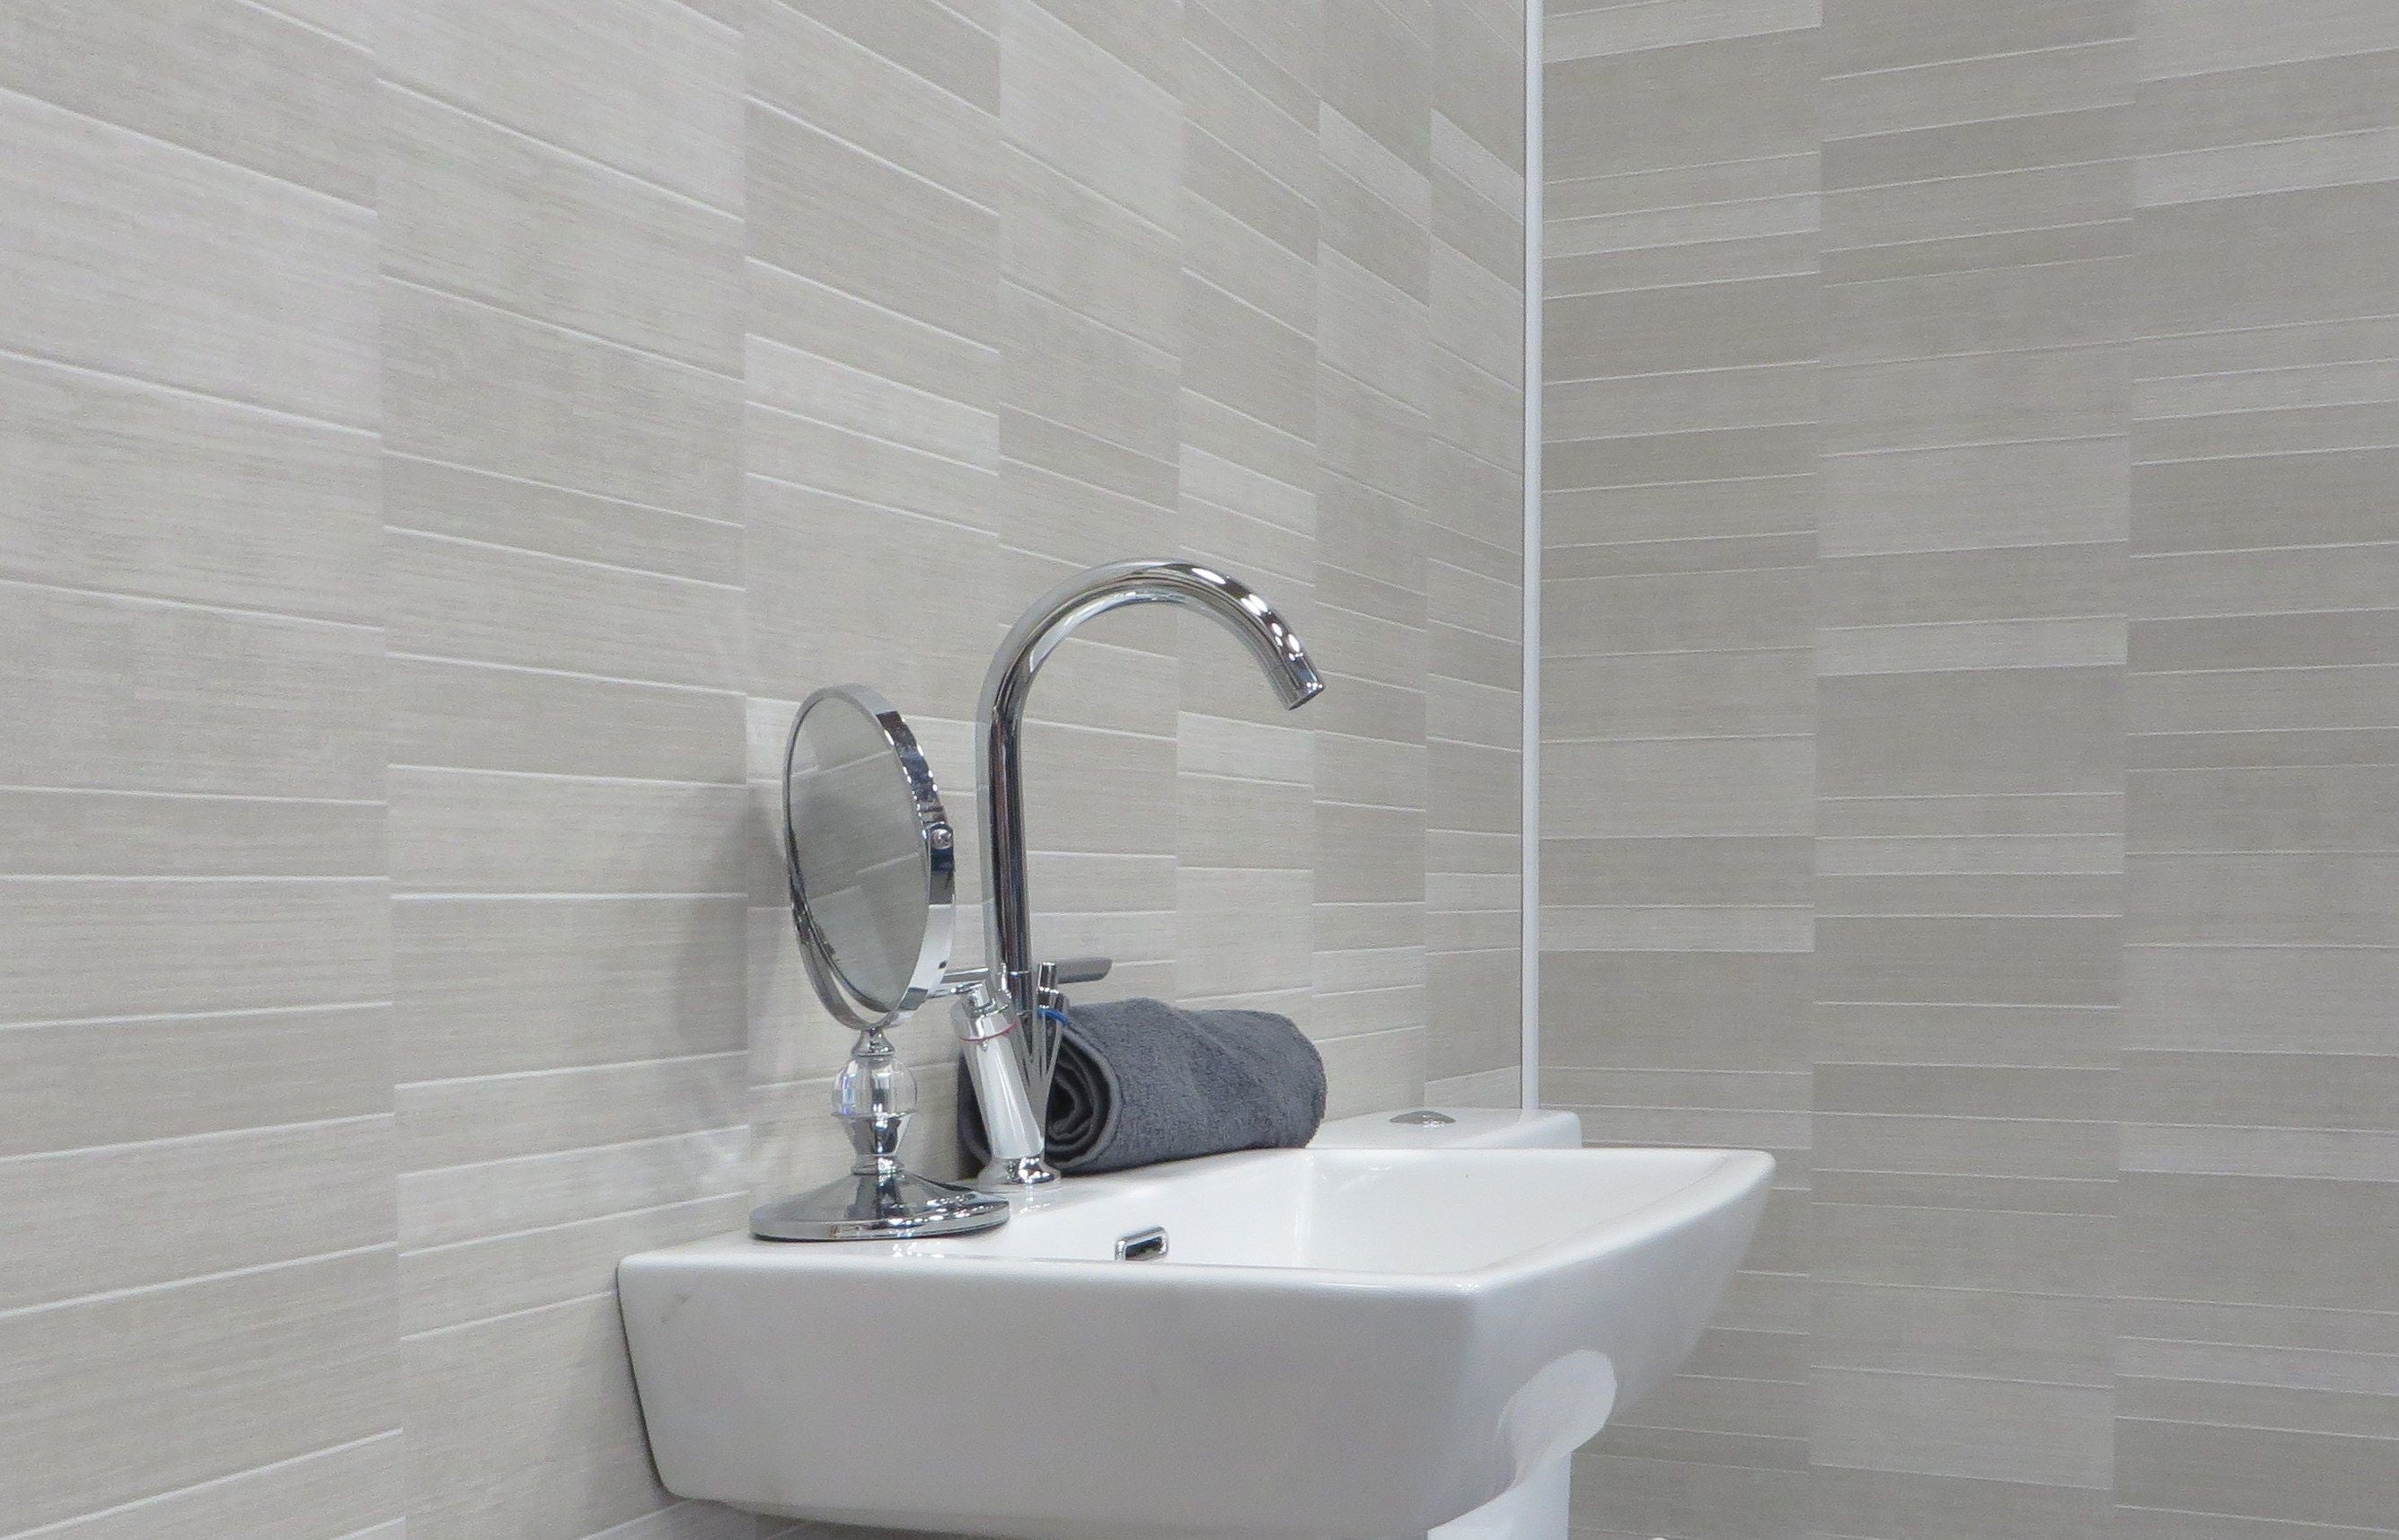  Cladding World’s stylish panels are a cost-effective alternative to tiles. With no grouting the process is made easy. 